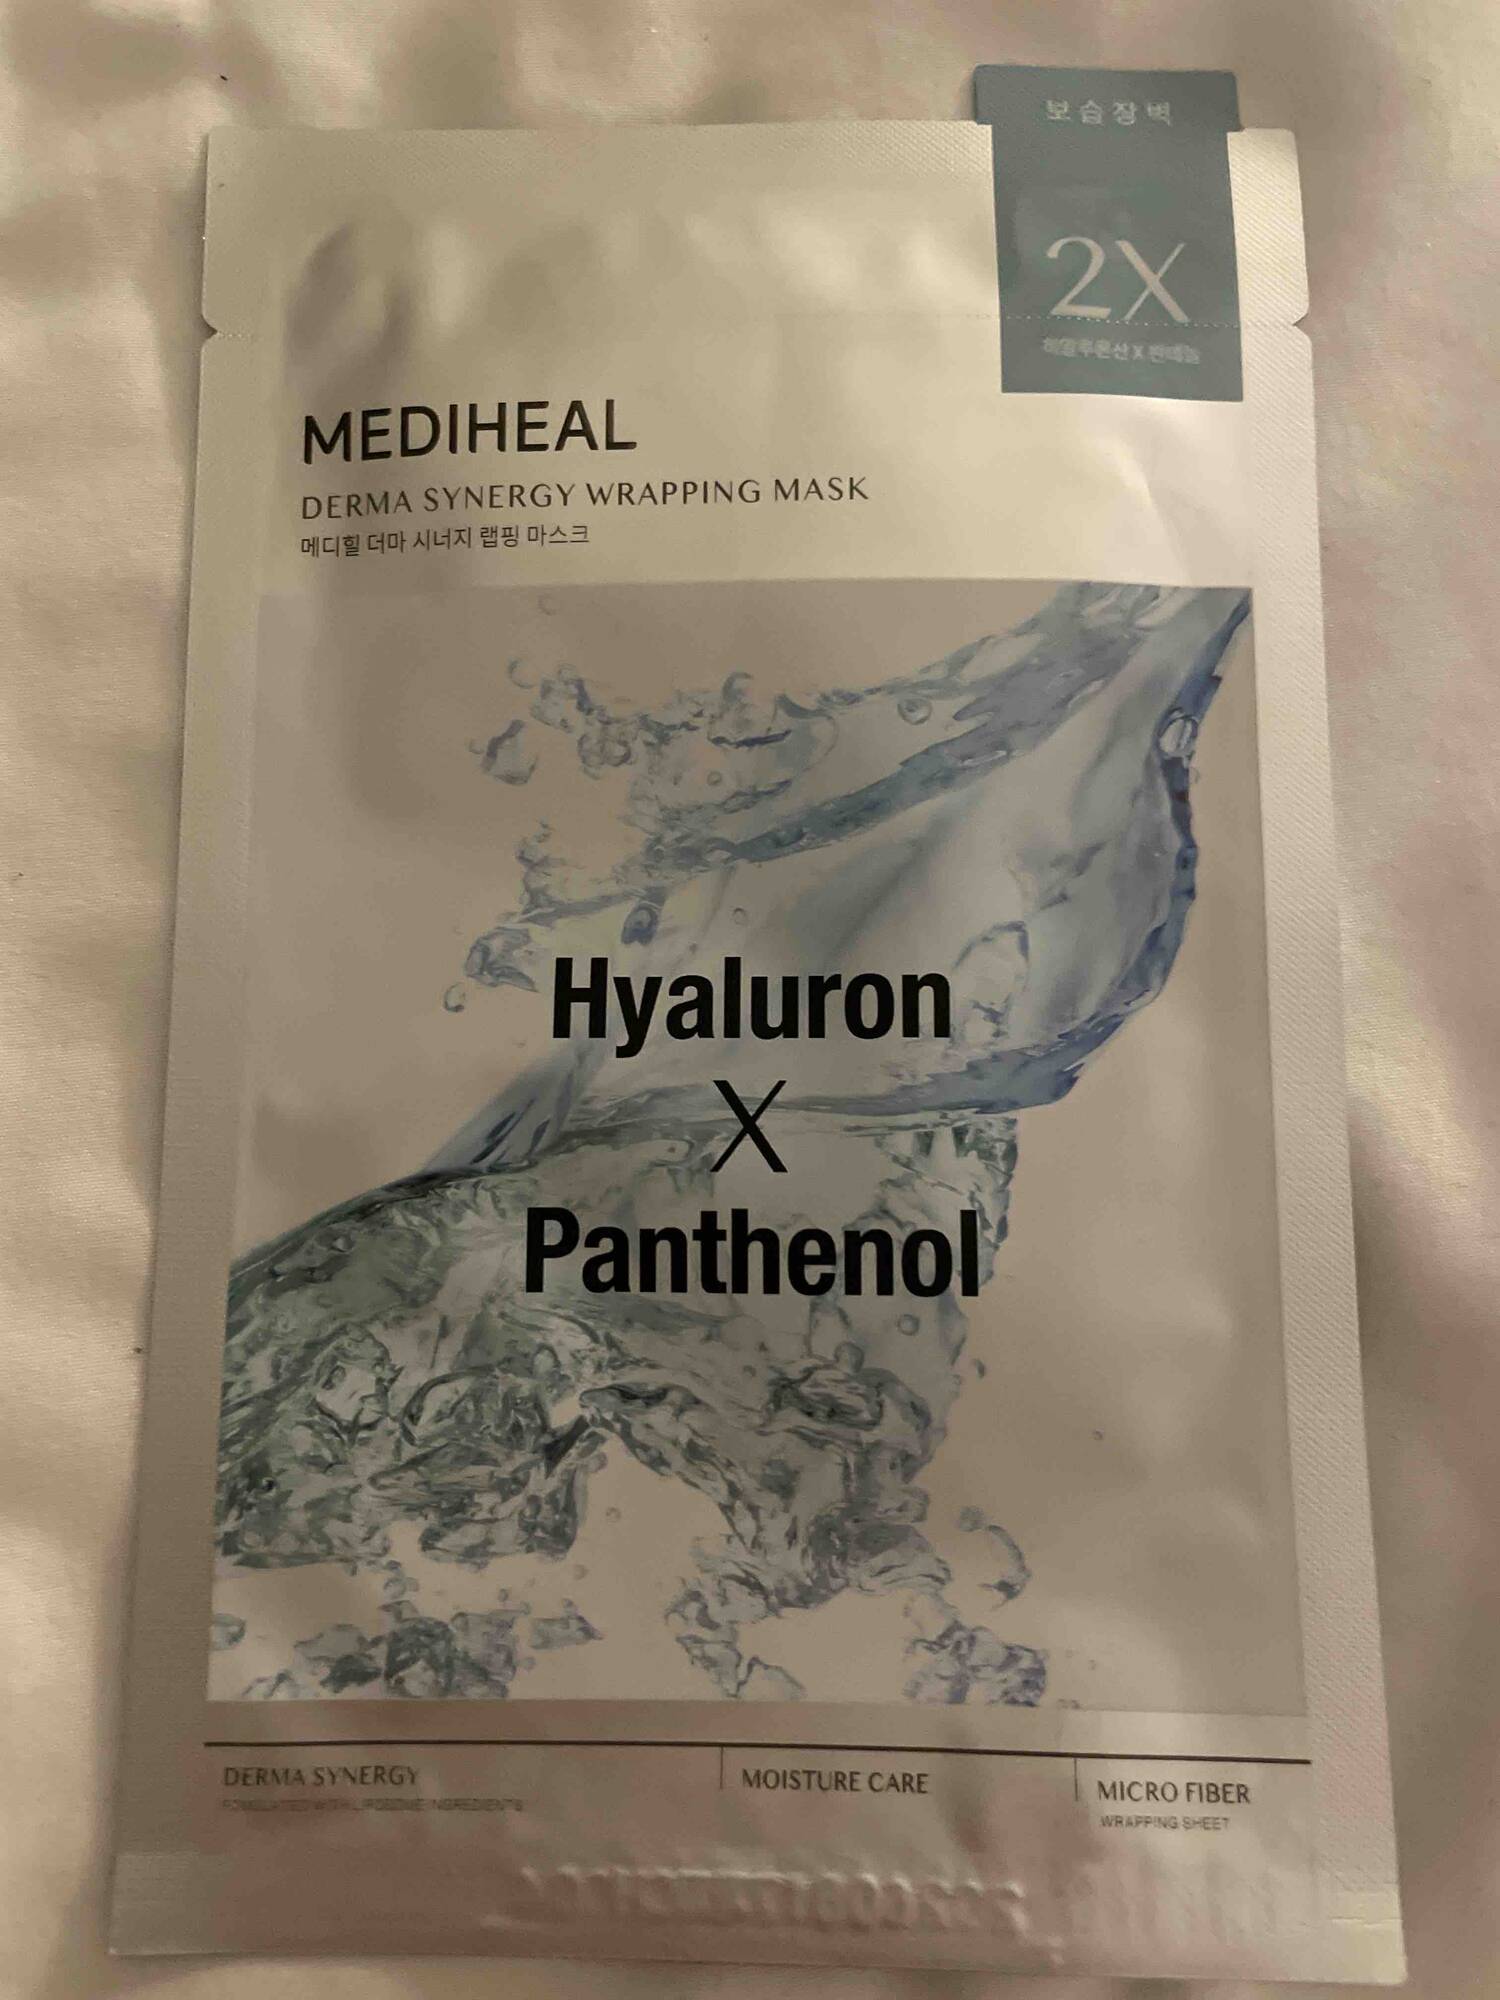 MEDIHEAL - Derma synergy wrapping mask